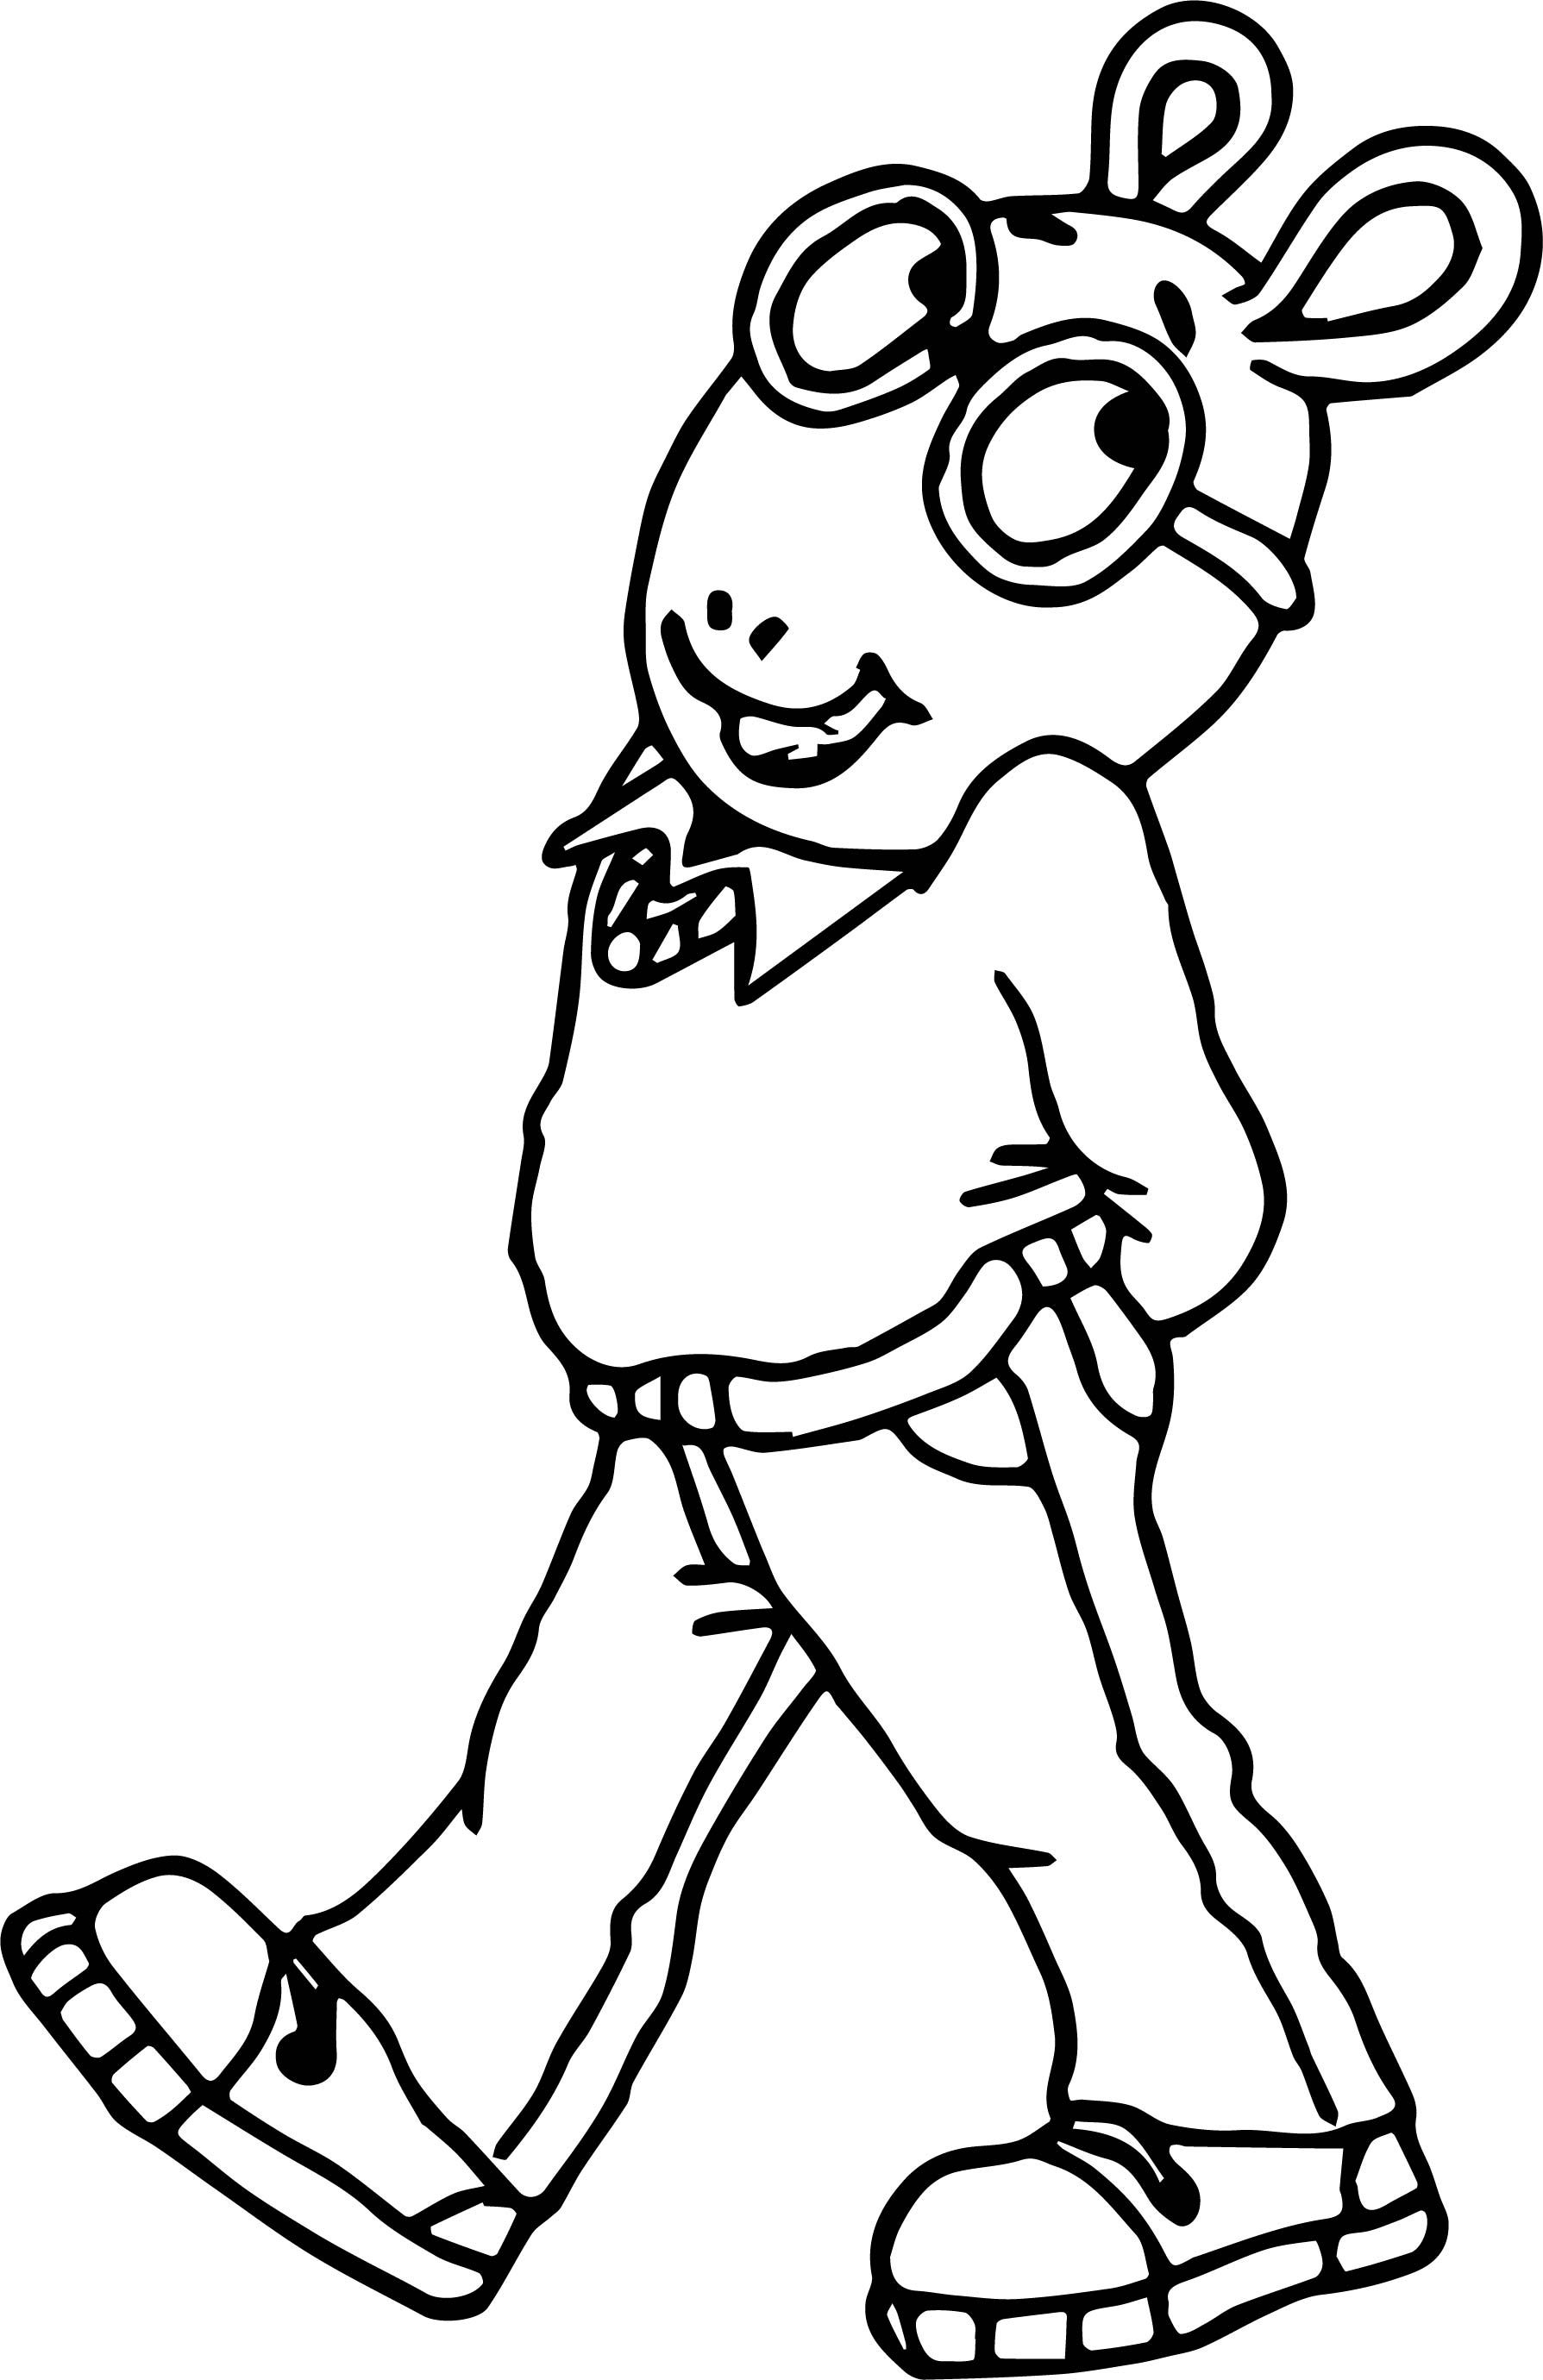 nice Arthur Think Walk Coloring Page | Coloring pages, Coloring sheets for  kids, Boy coloring